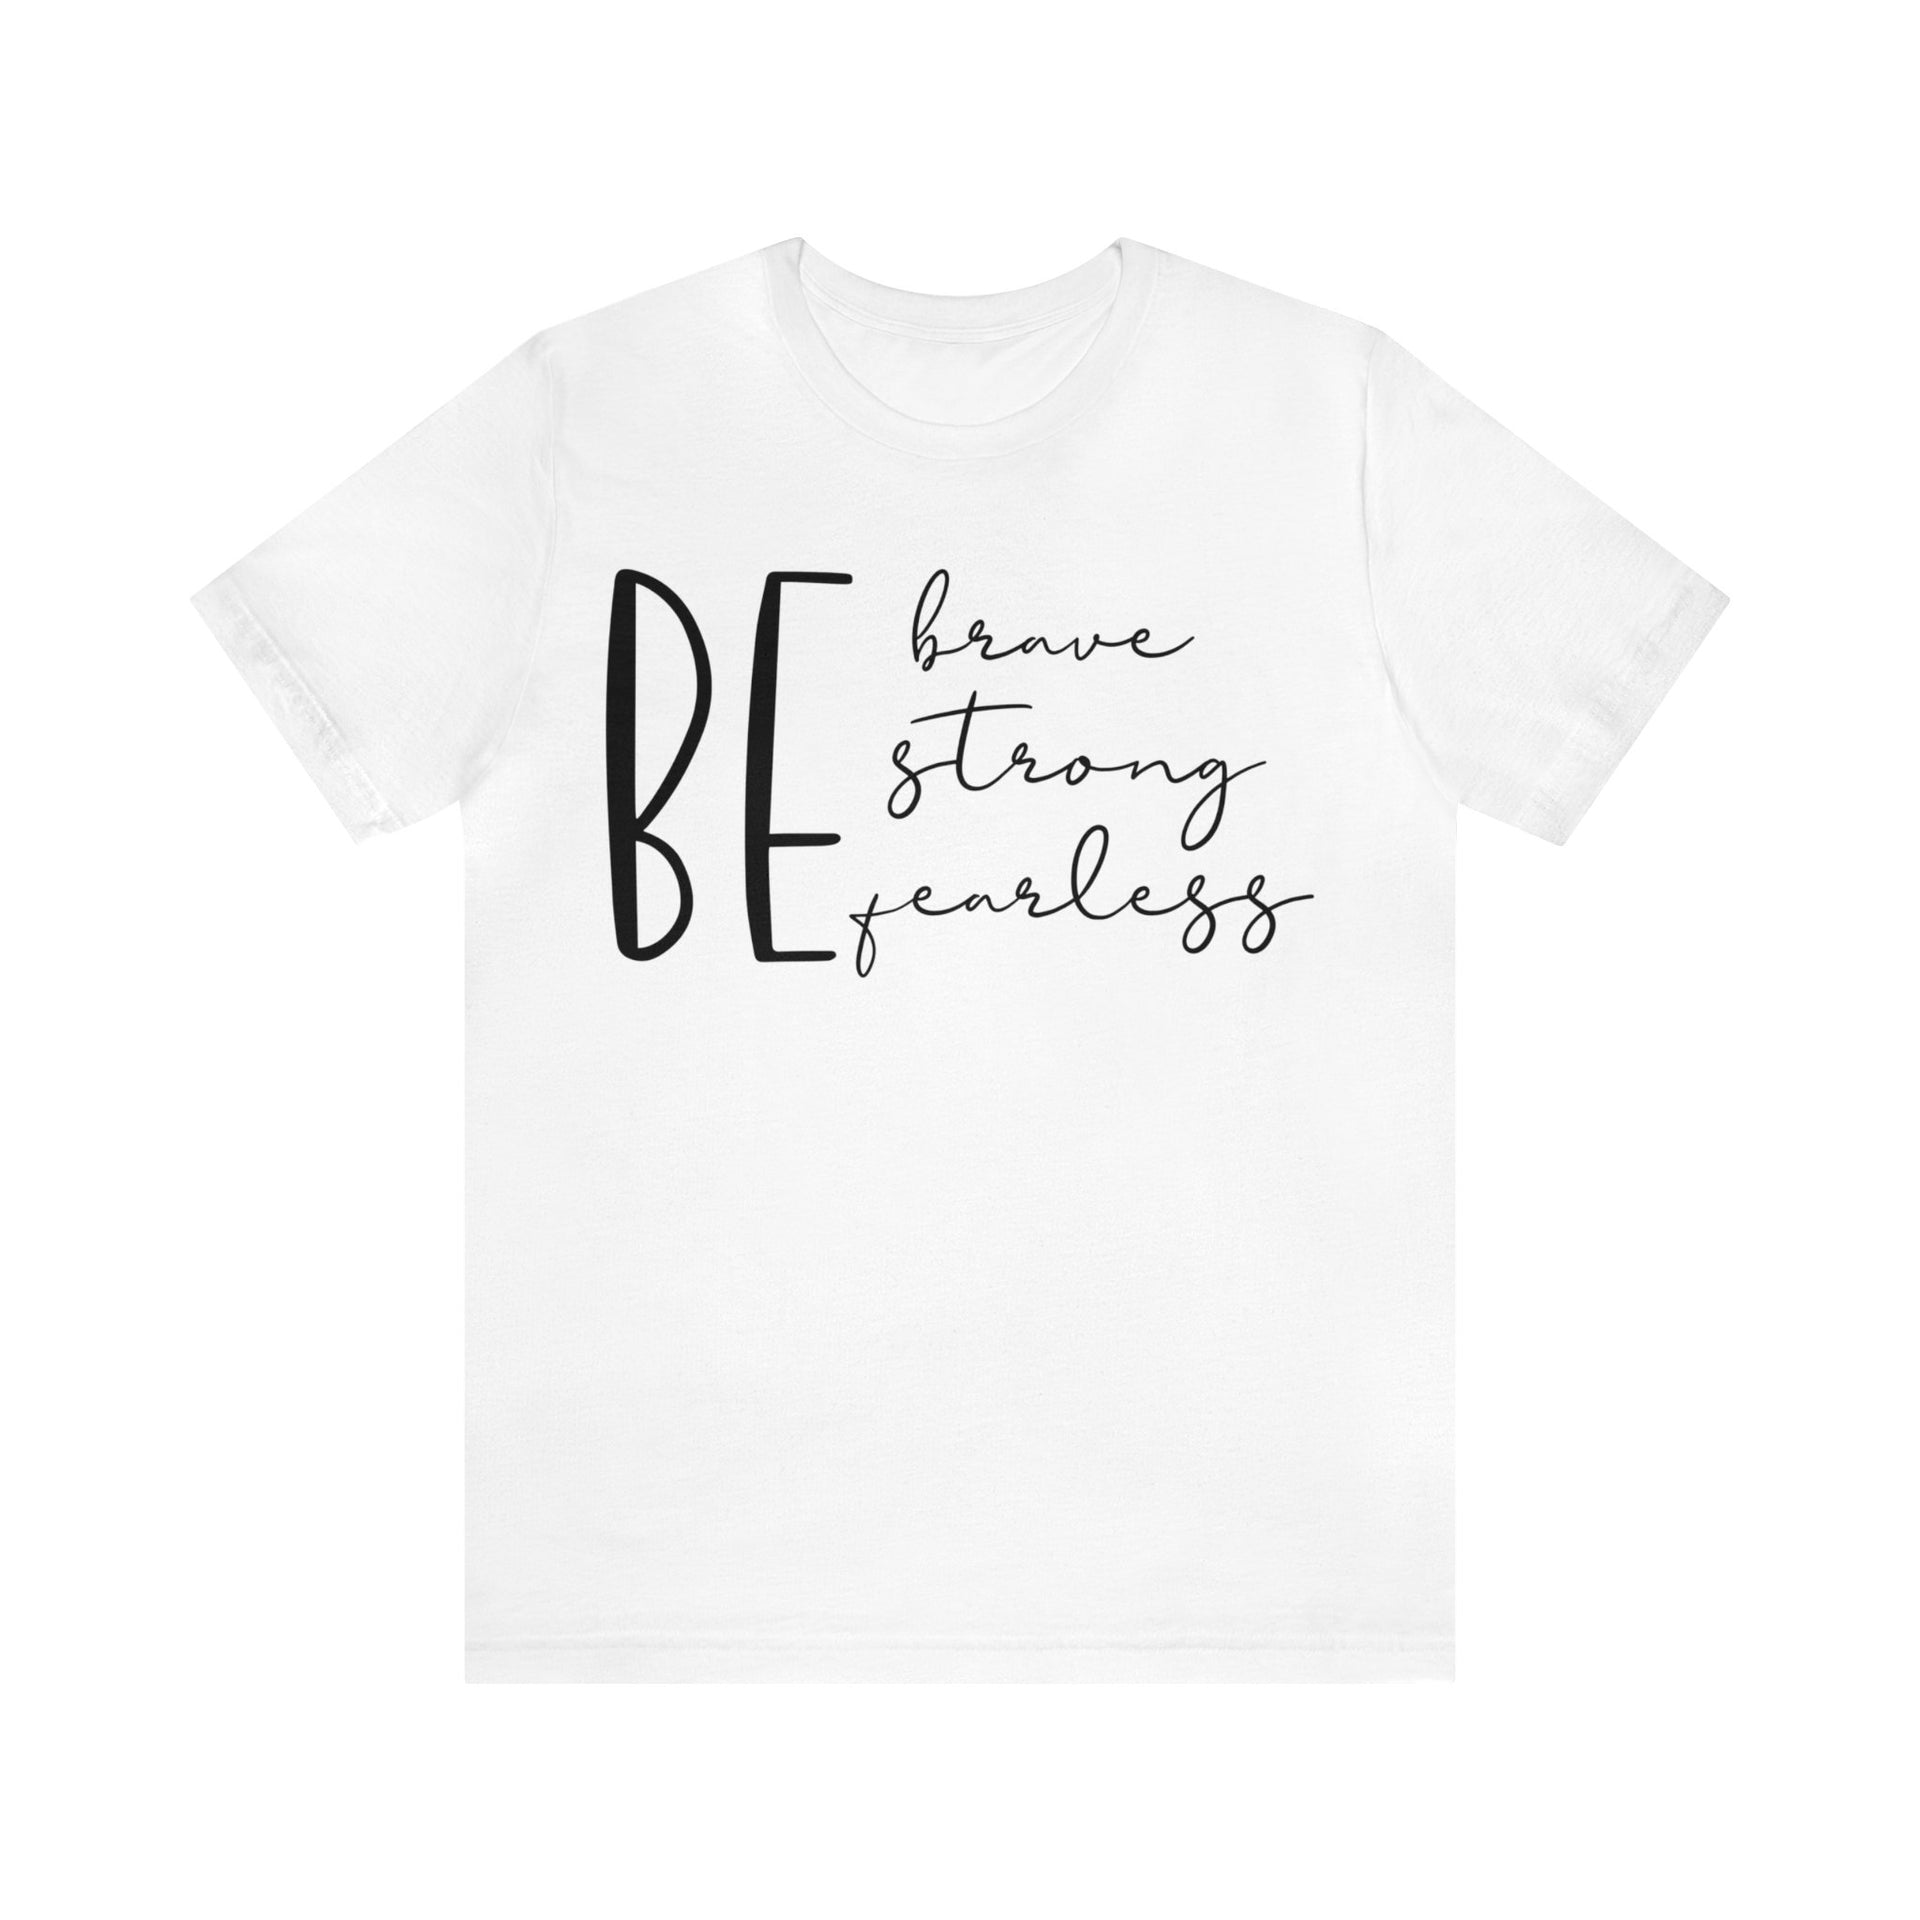 Be Strong. Be Brave. Be Fearless. Graphic by Grace by Herr